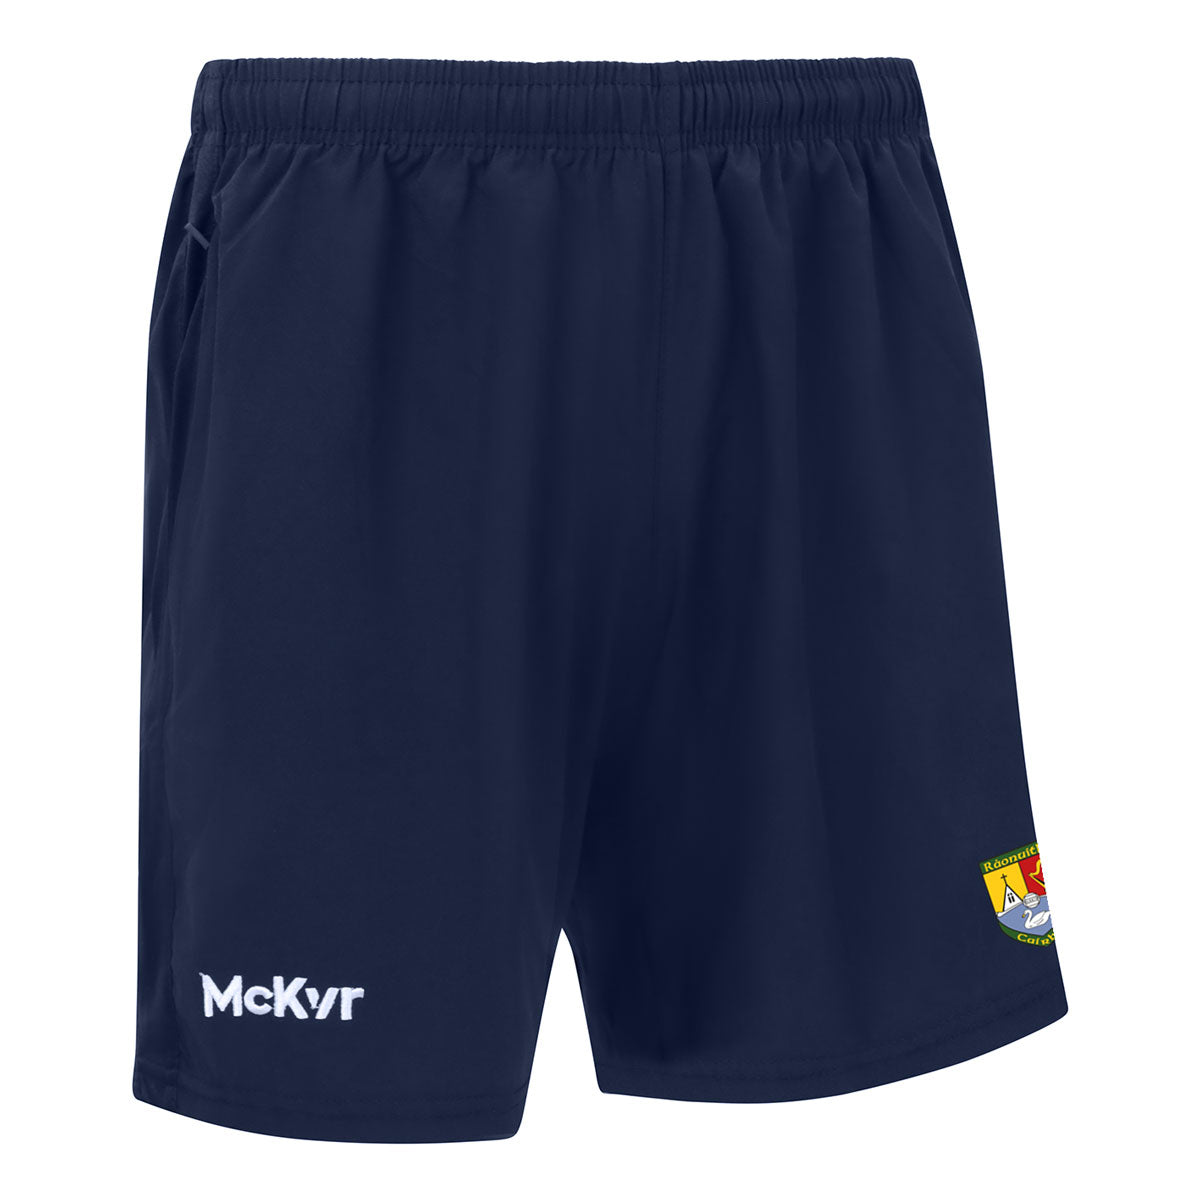 Mc Keever Carbery Rangers GAA Core 22 Leisure Shorts - Youth - Navy